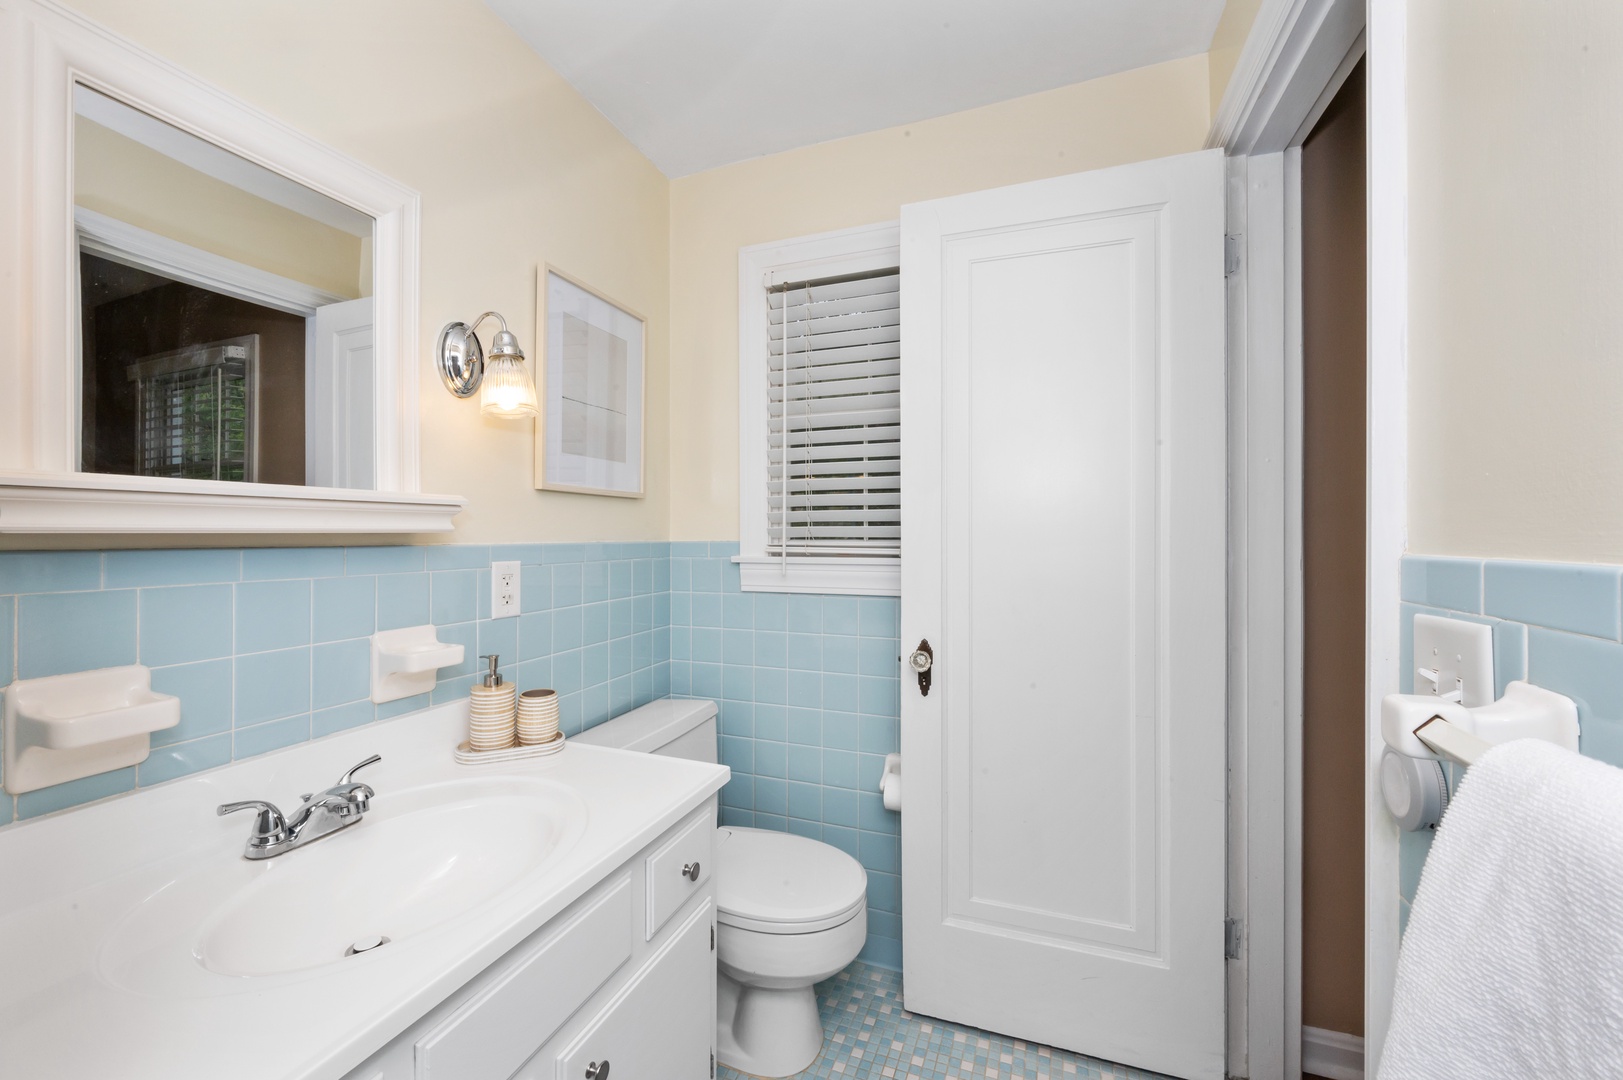 The 2nd floor full bathroom includes a single vanity & shower/tub combo